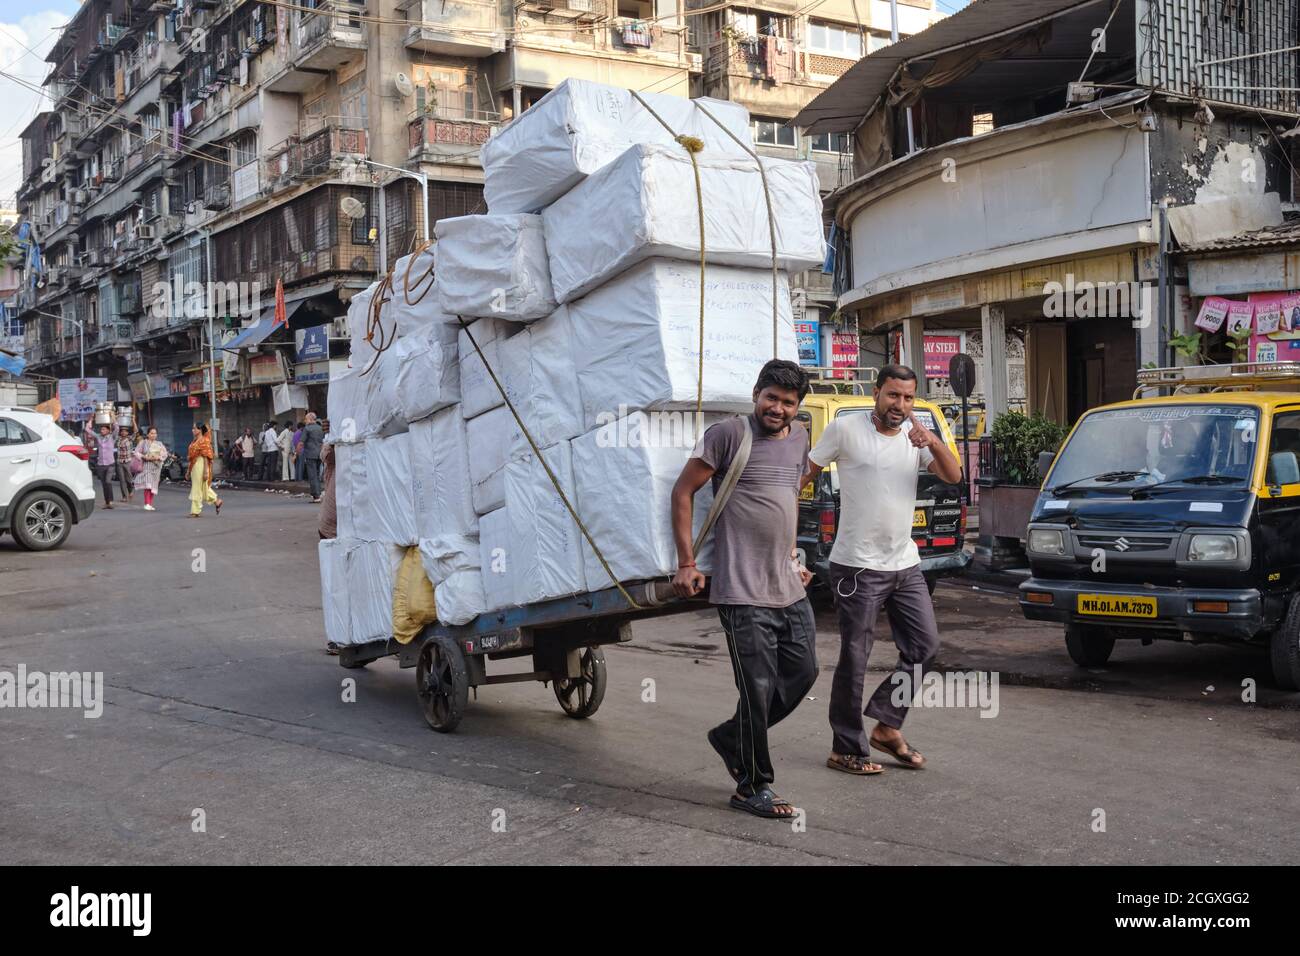 Cheerful handcart pullers in Mumbai, India, pulling a cart loaded with almost a ton of bales of cloth Stock Photo